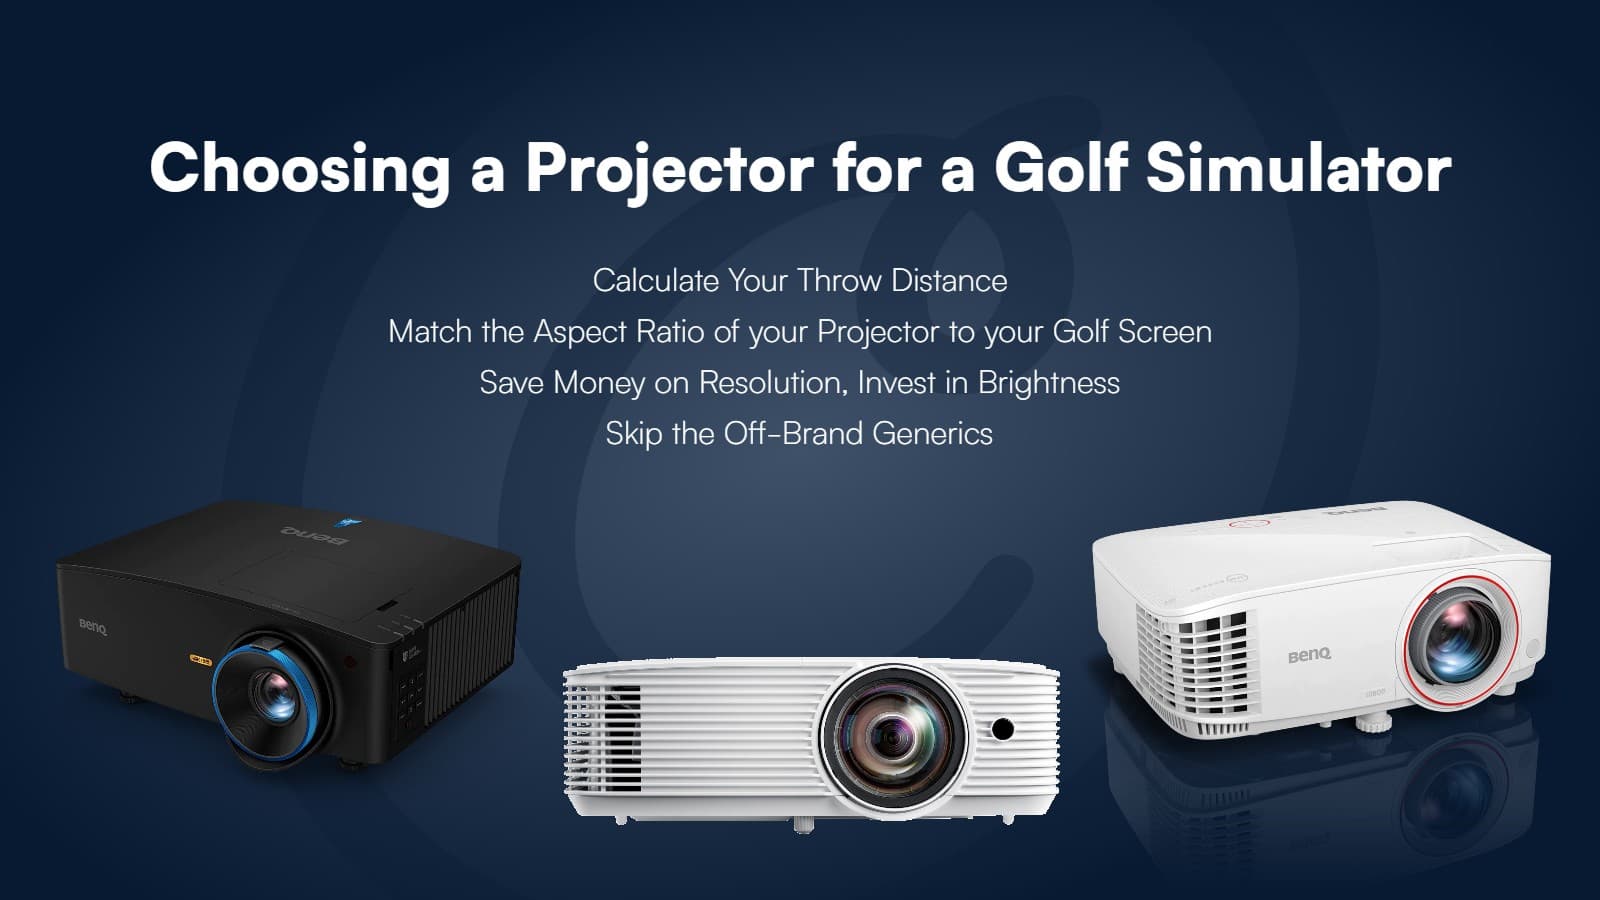 Choosing a golf simulator projector tips, with BenQ and Optoma projectors